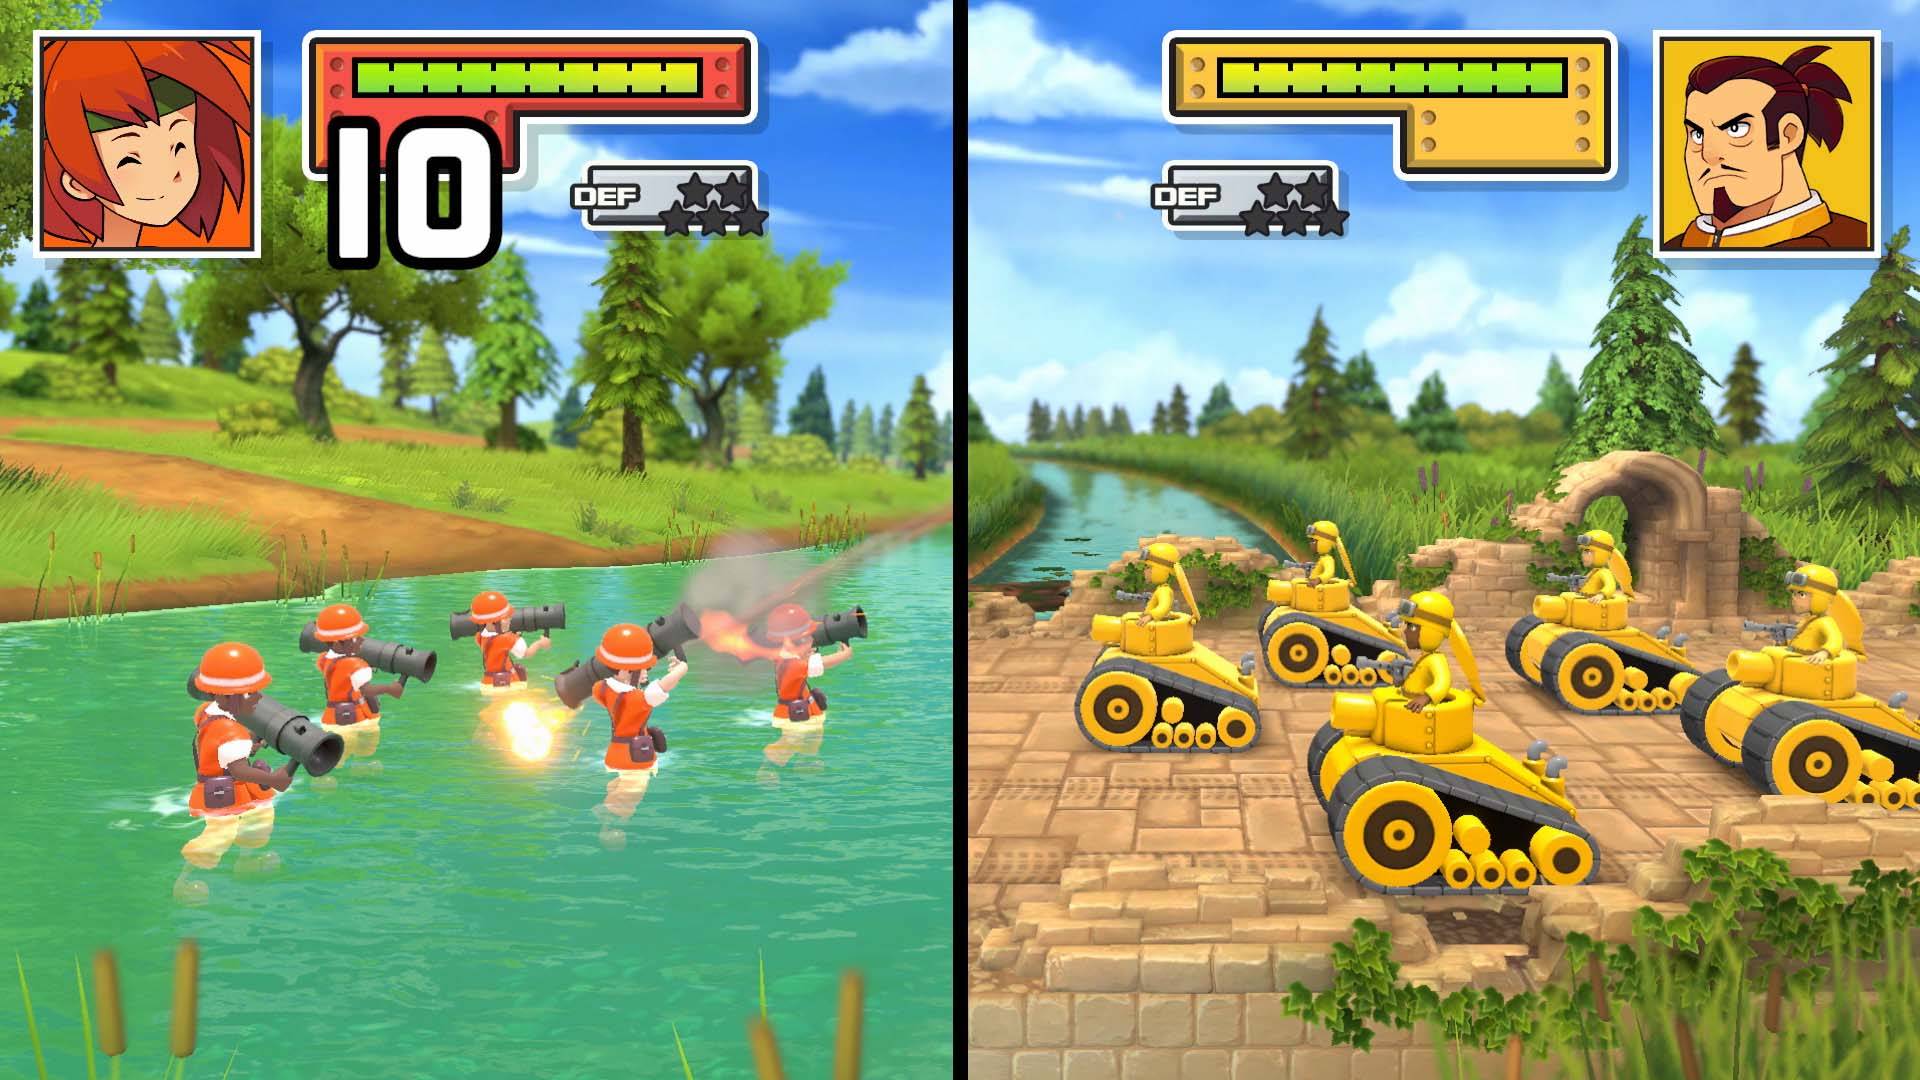 Advance Wars Retreats To A Spring 2022 Release thumbnail